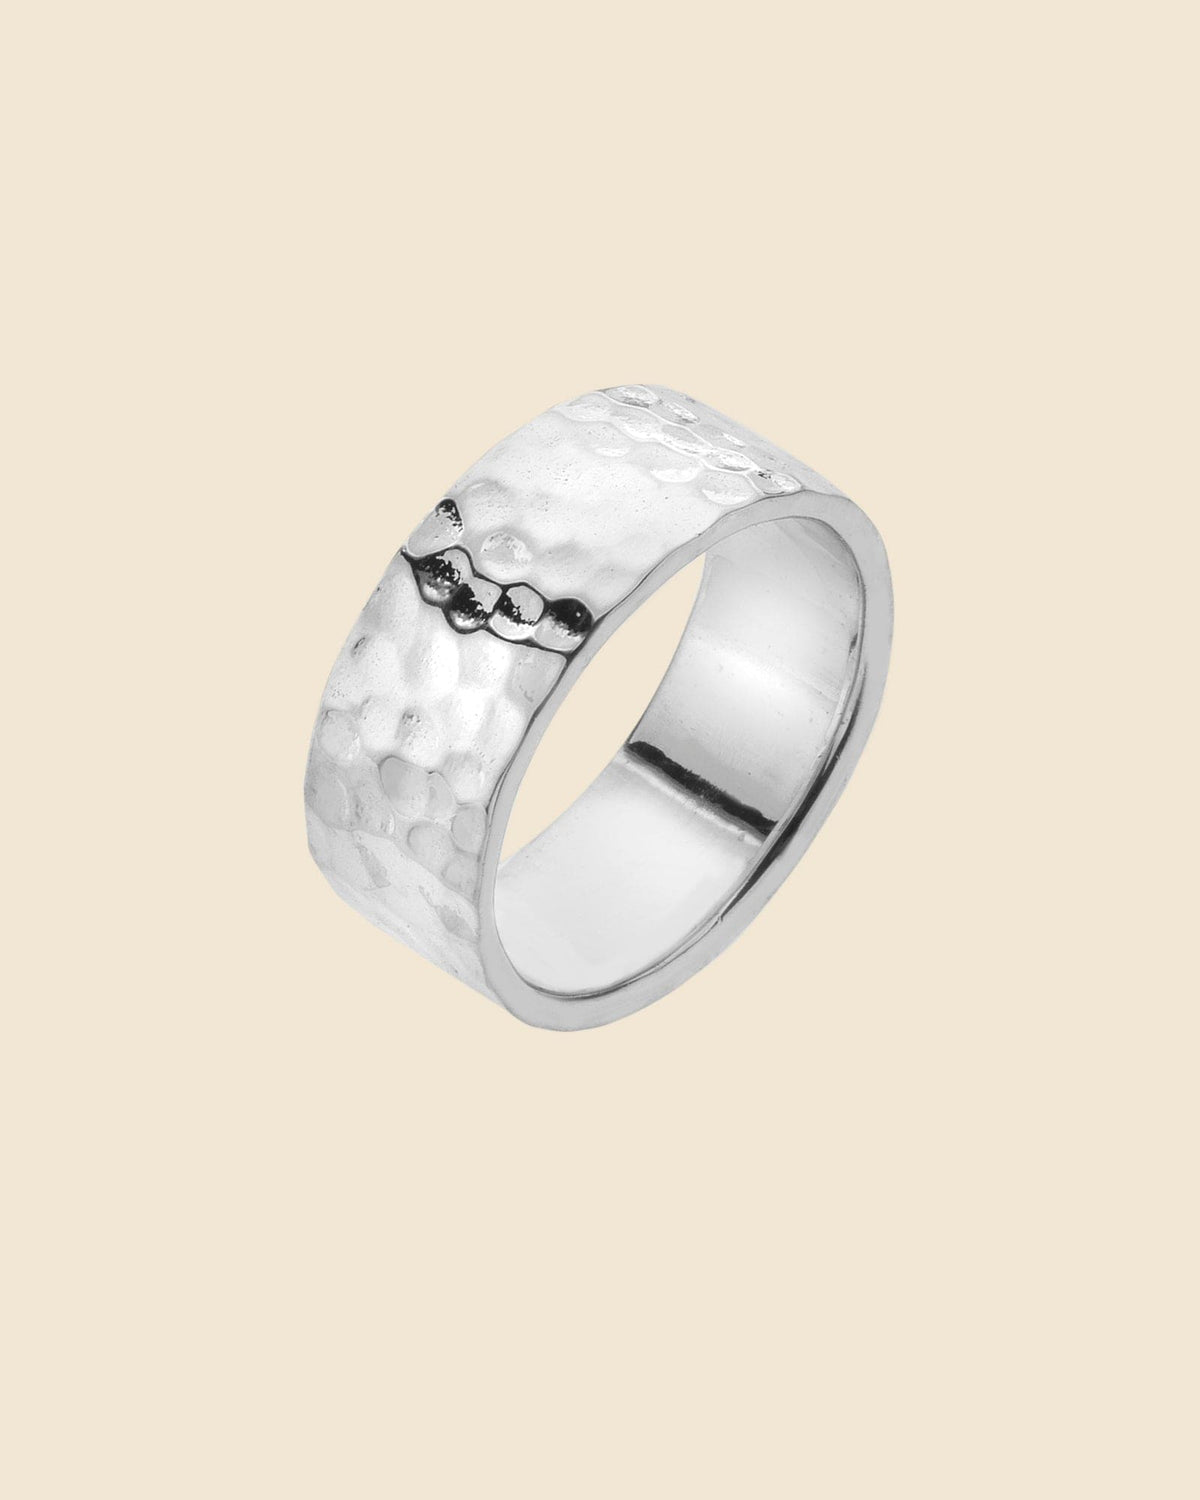 8mm Hammered Sterling Silver Band Ring